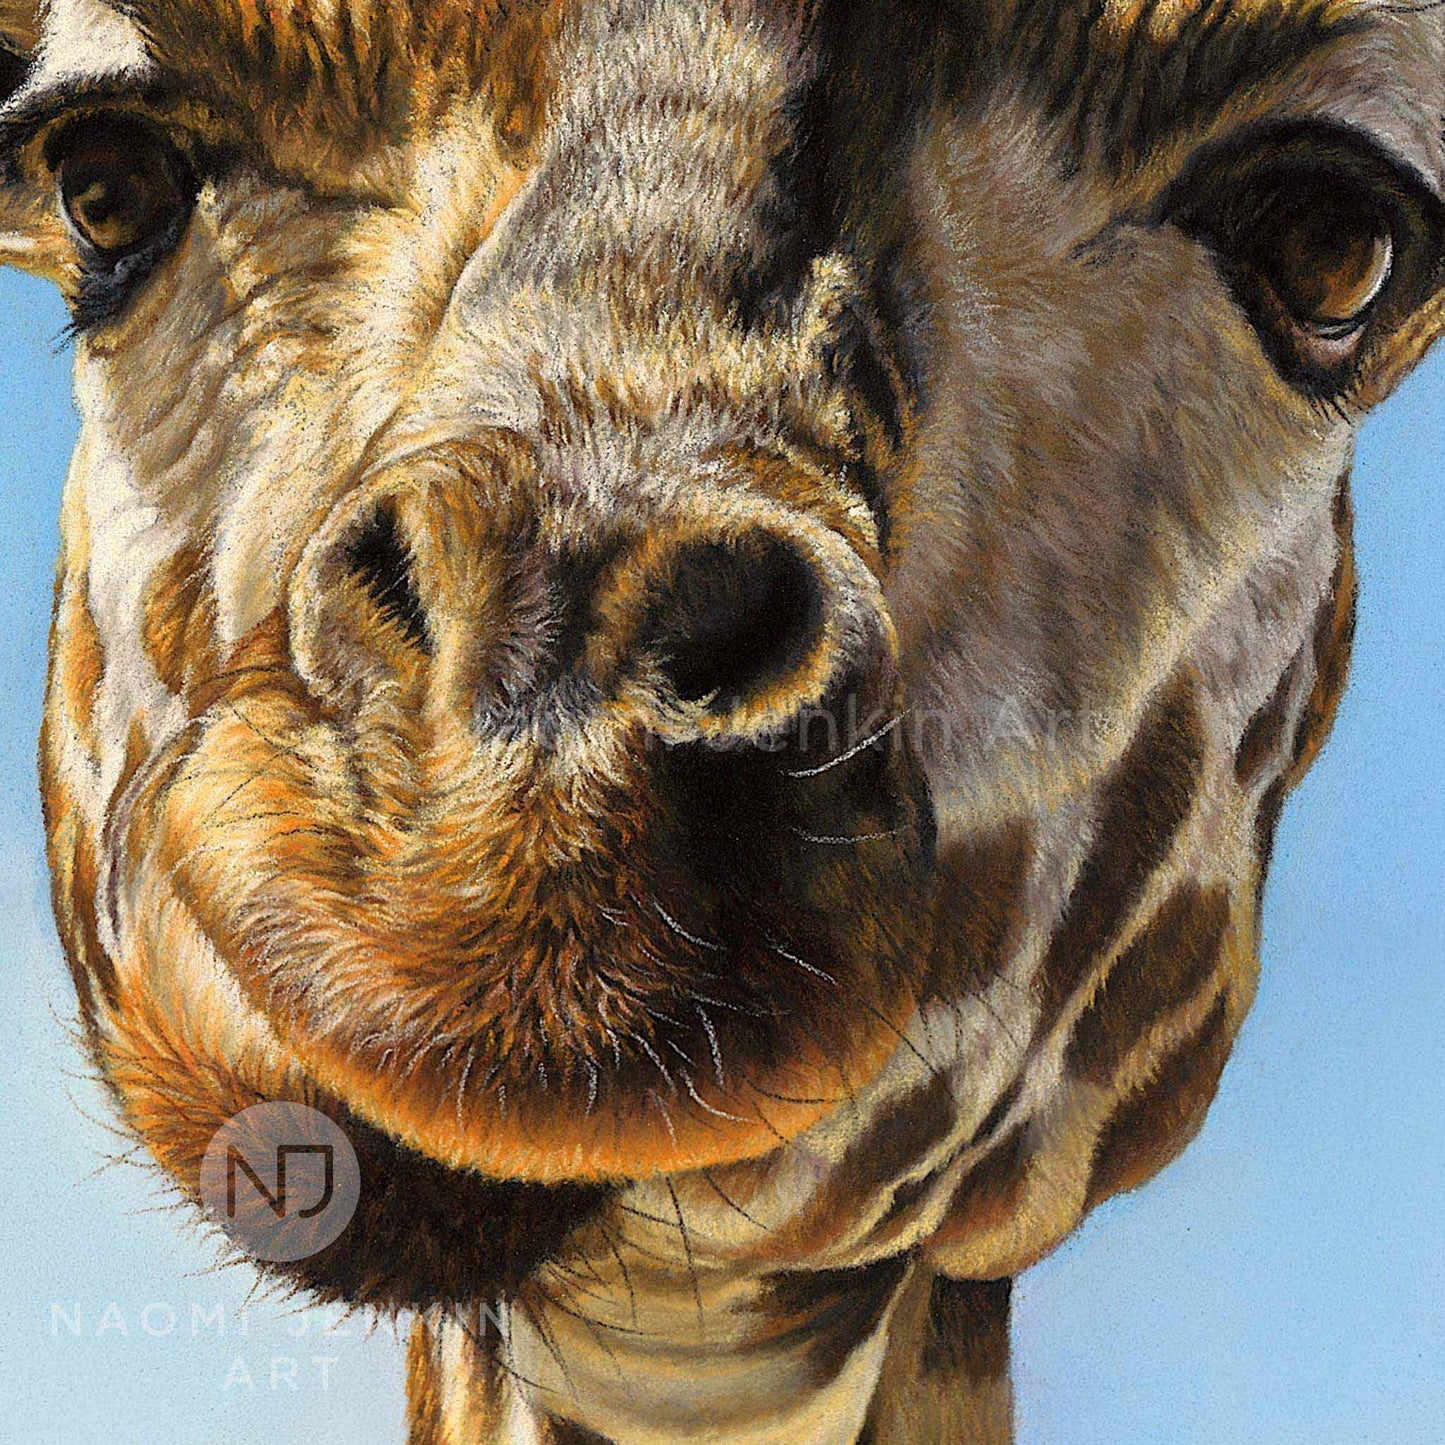 Close up comical giraffe face drawing from the print 'Neck and Neck' by Naomi Jenkin